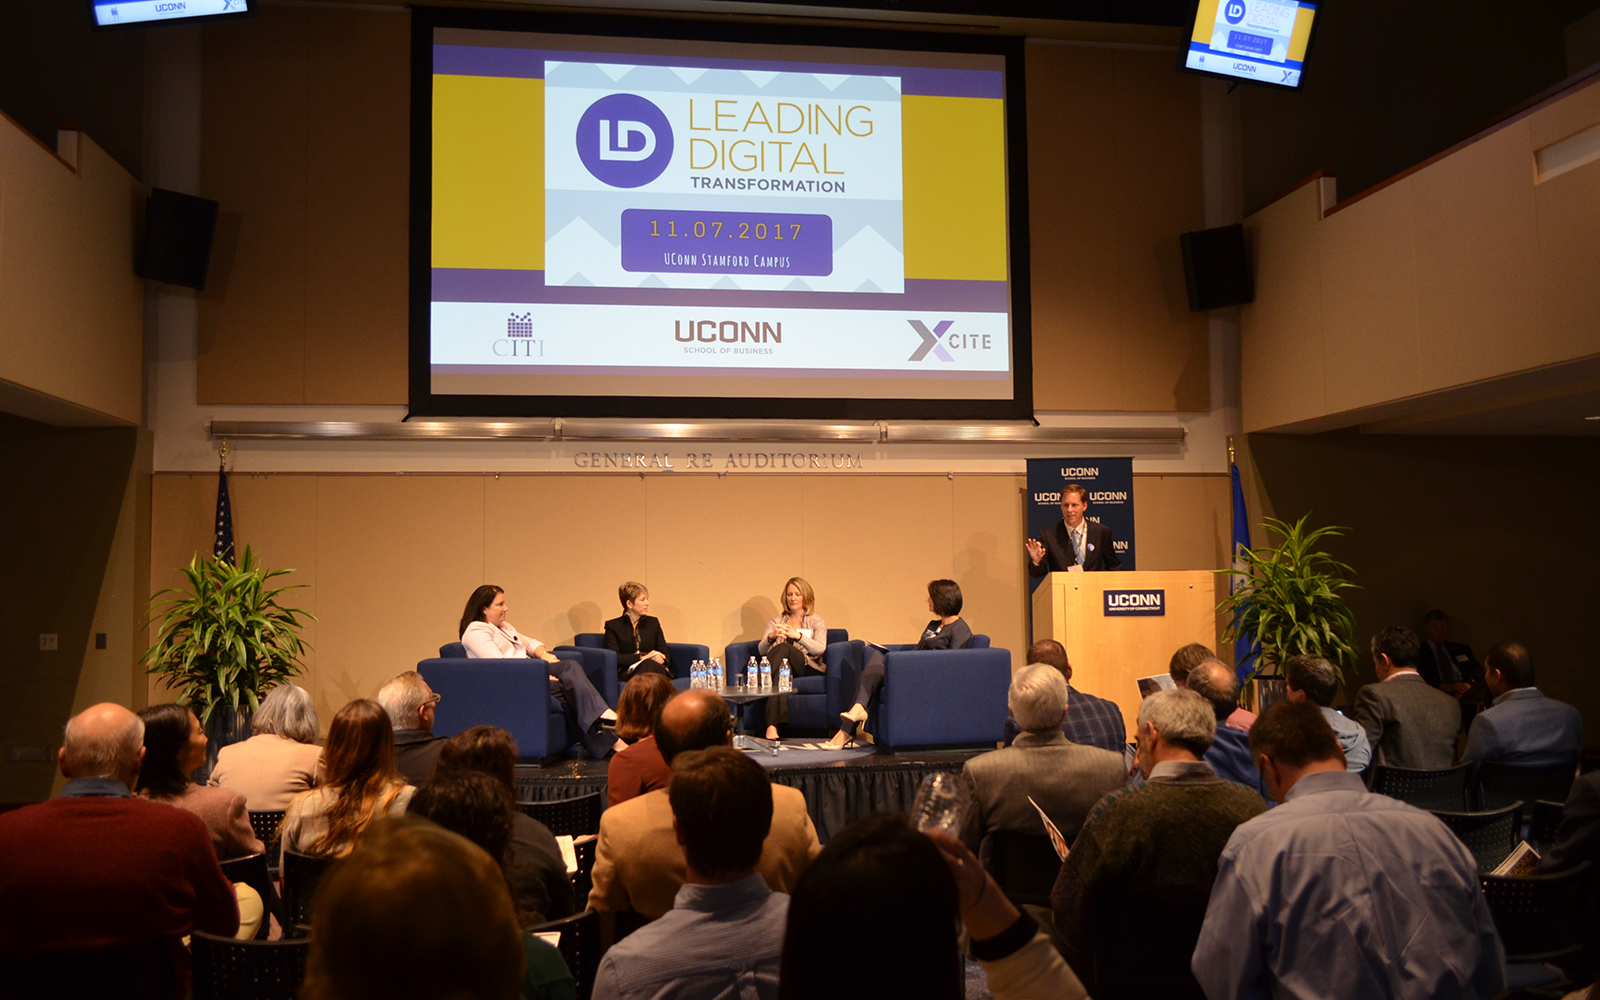 CIO panelists from Synchrony Financial, FactSet, and Stanley Black & Decker talk about Leading Digital Transformation (Katherine Ruiz/UConn School of Business)